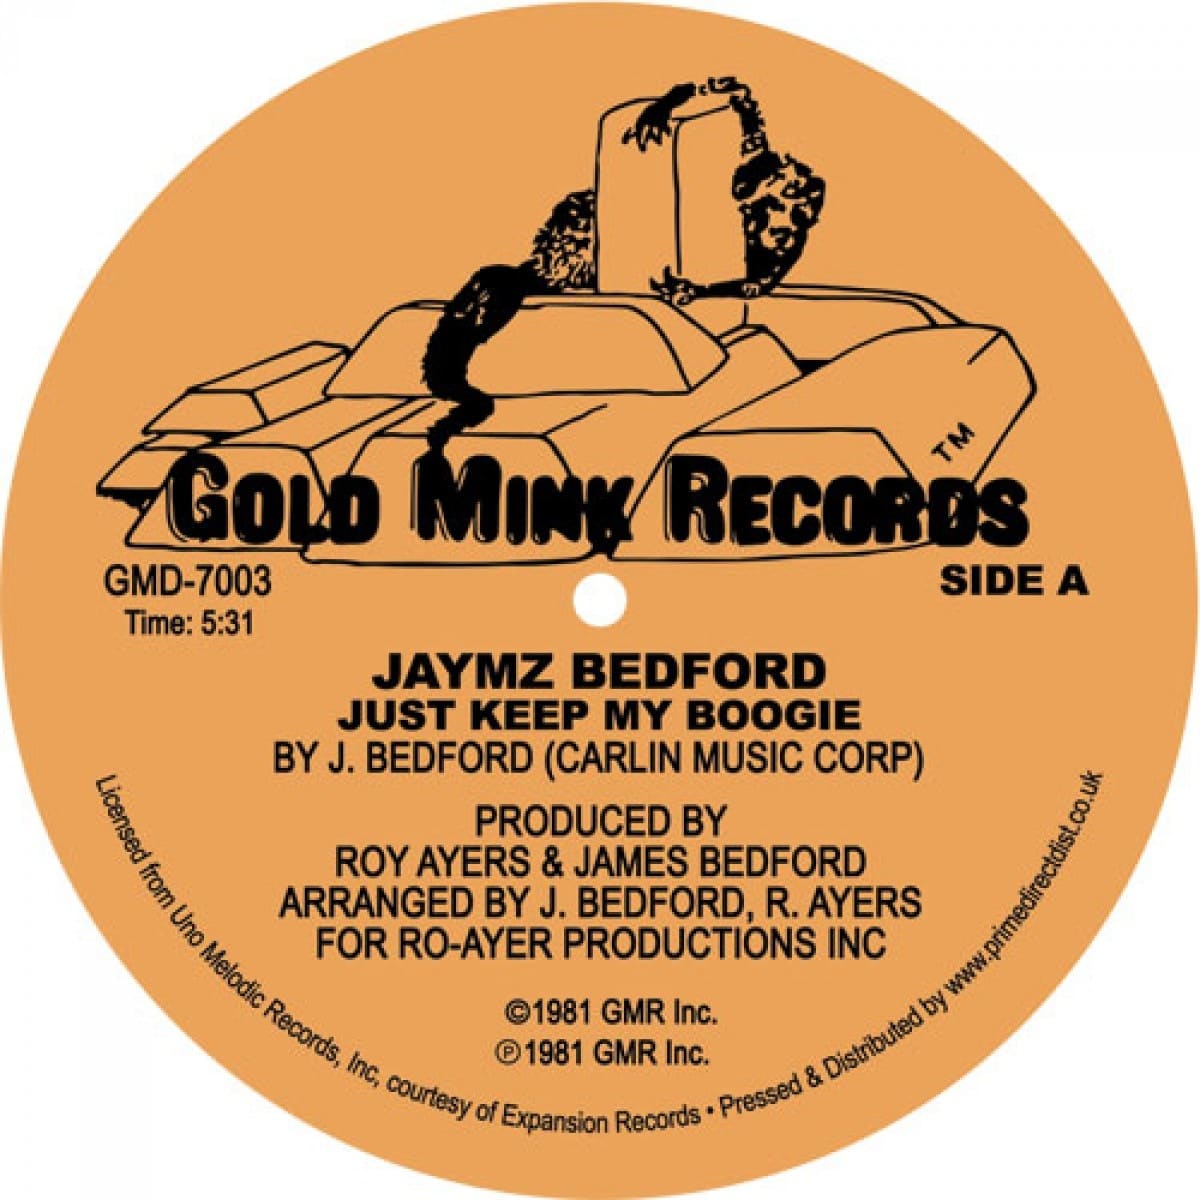 Jaymz Bedford - Just Keep My Boogie - GMD7003 - GOLD MINK